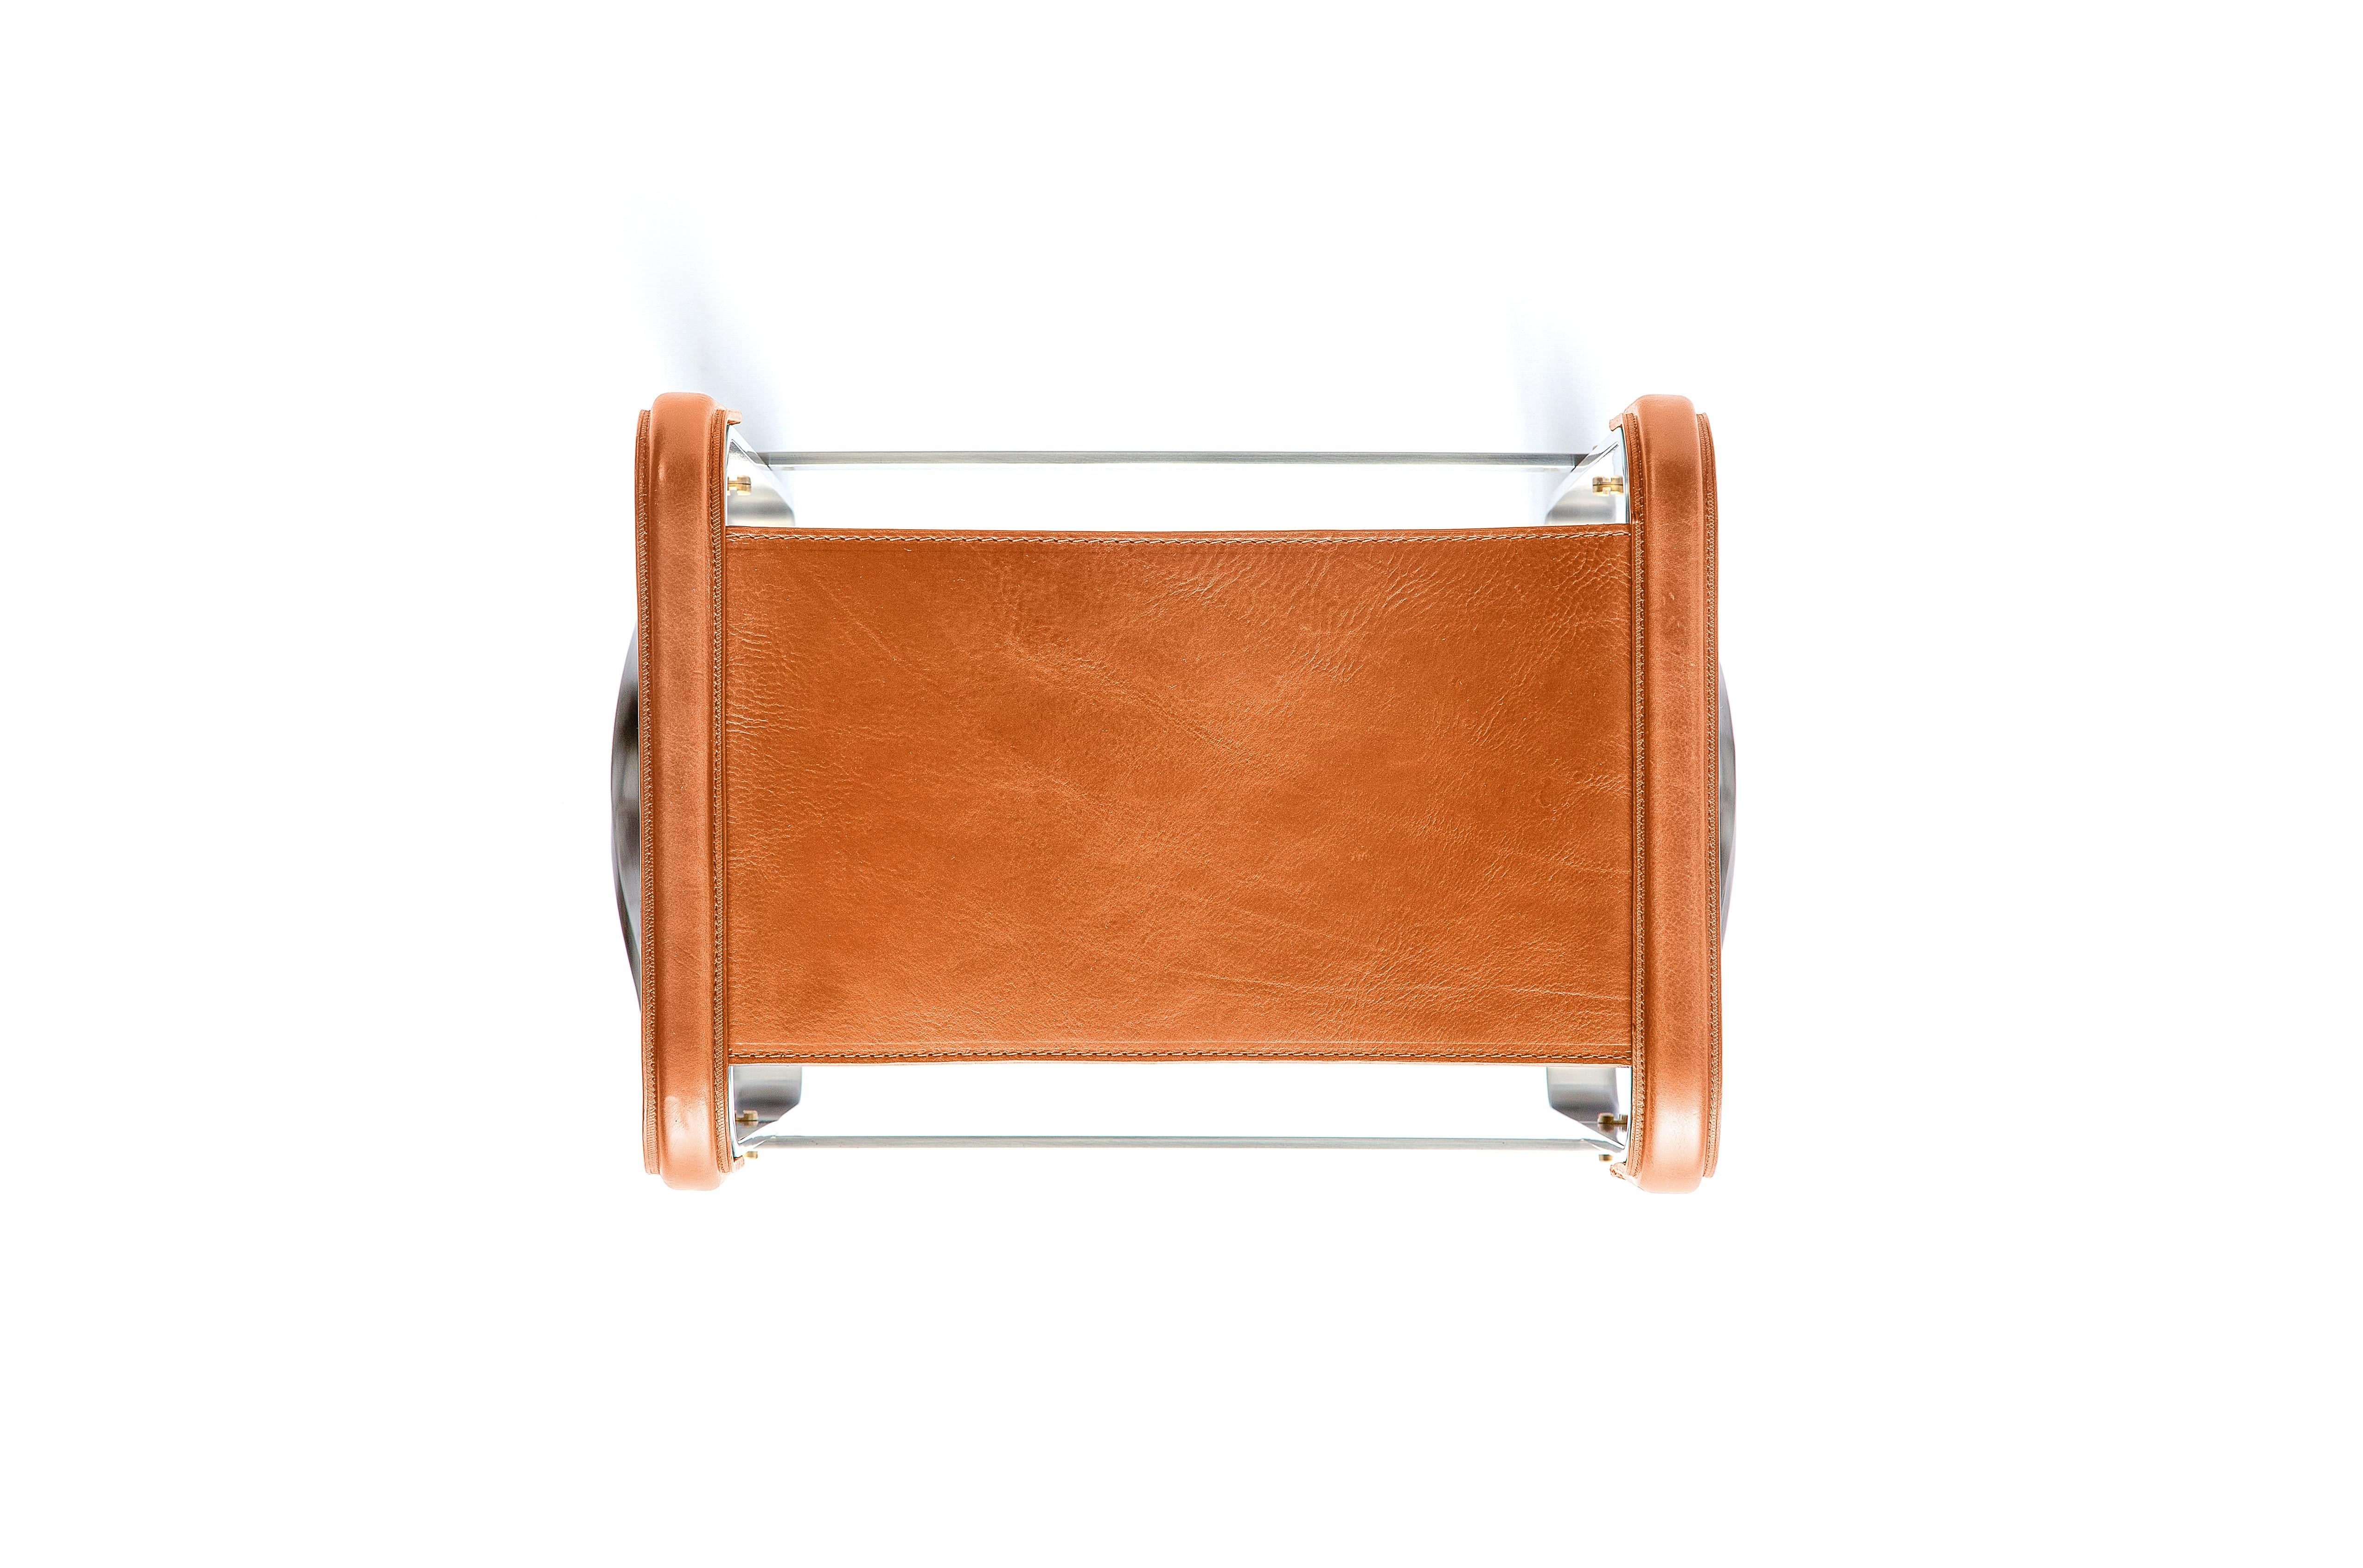 Barhocker Silver Aged Steel & Natural Tobacco Saddle Leather Contemporary Style (Spanisch) im Angebot